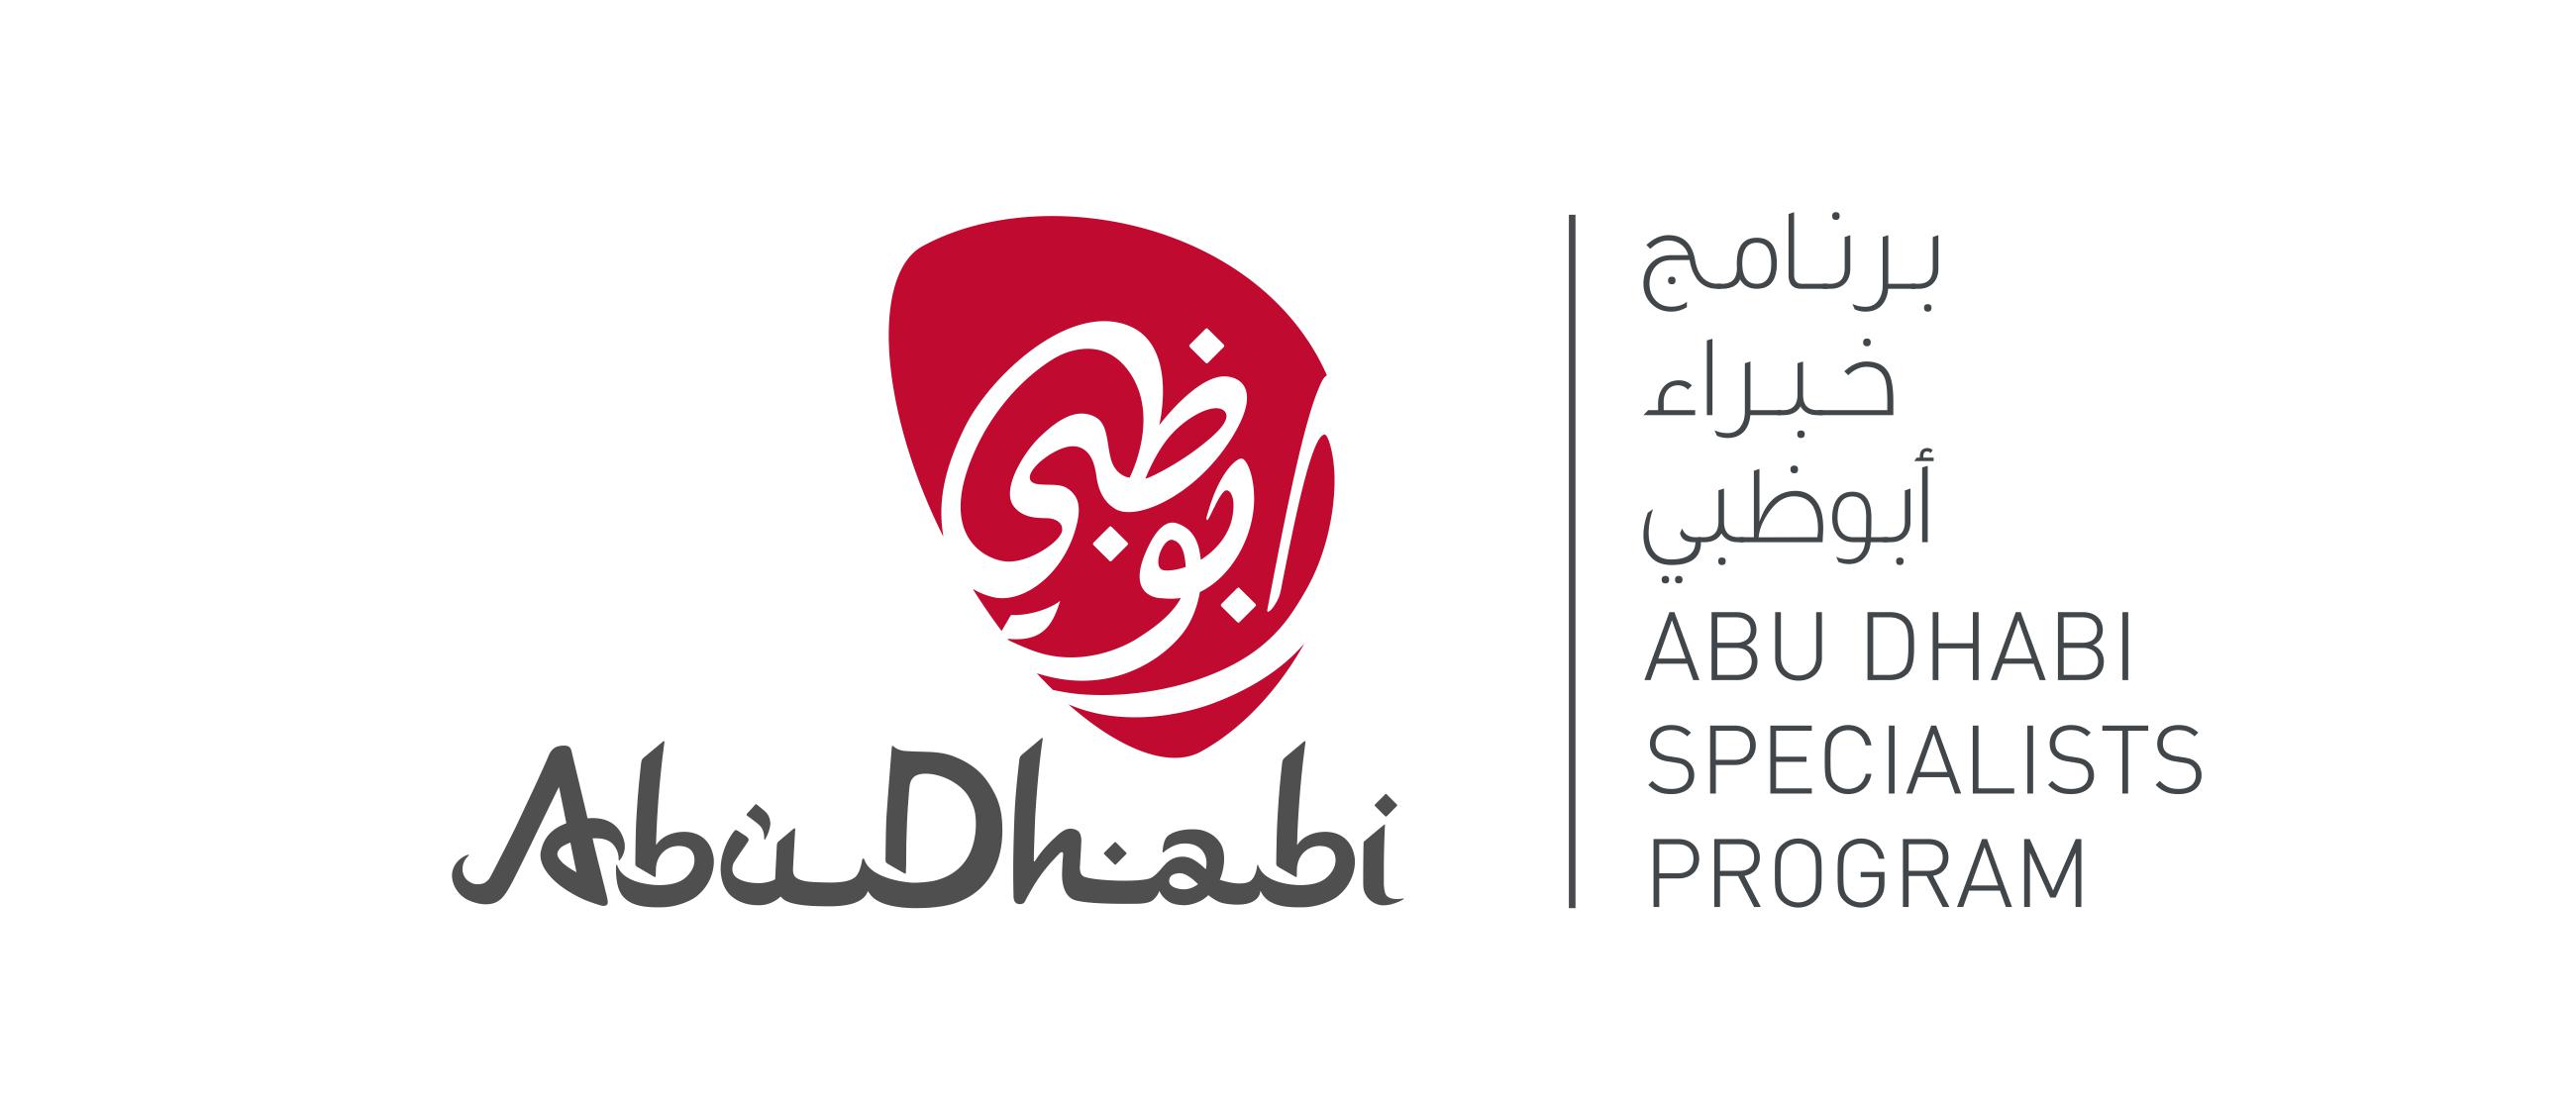 DCT Abu Dhabi To Launch ‘Abu Dhabi Specialists Programme’ For GCC Market